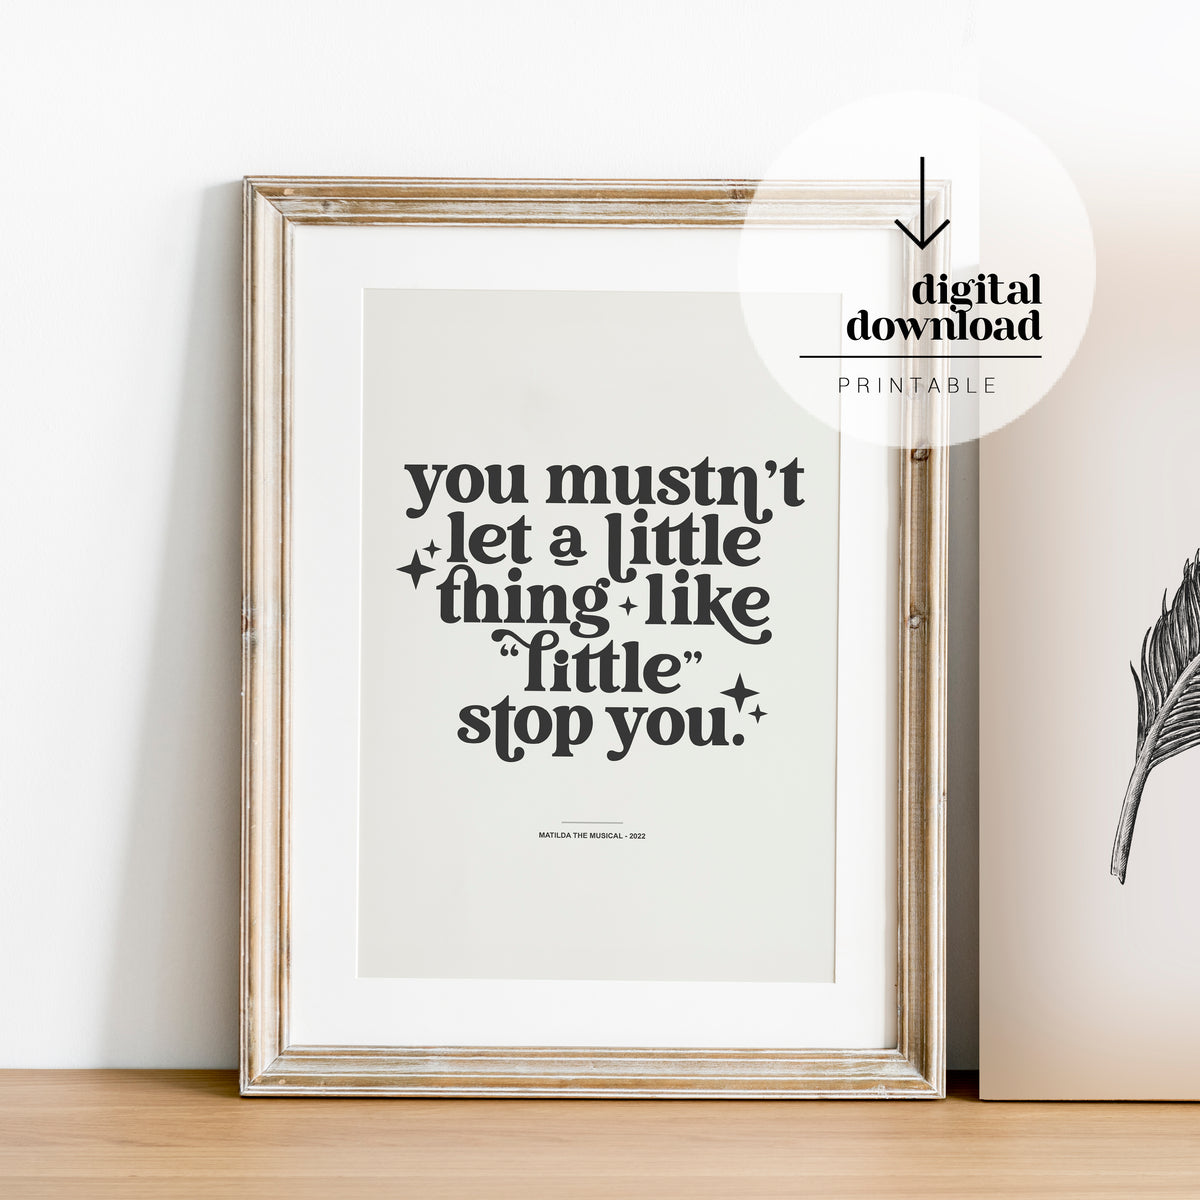 Matilda the Musical - Naughty "Little" Quote | DIGITAL ARTWORK DOWNLOAD EXCLUSIVE